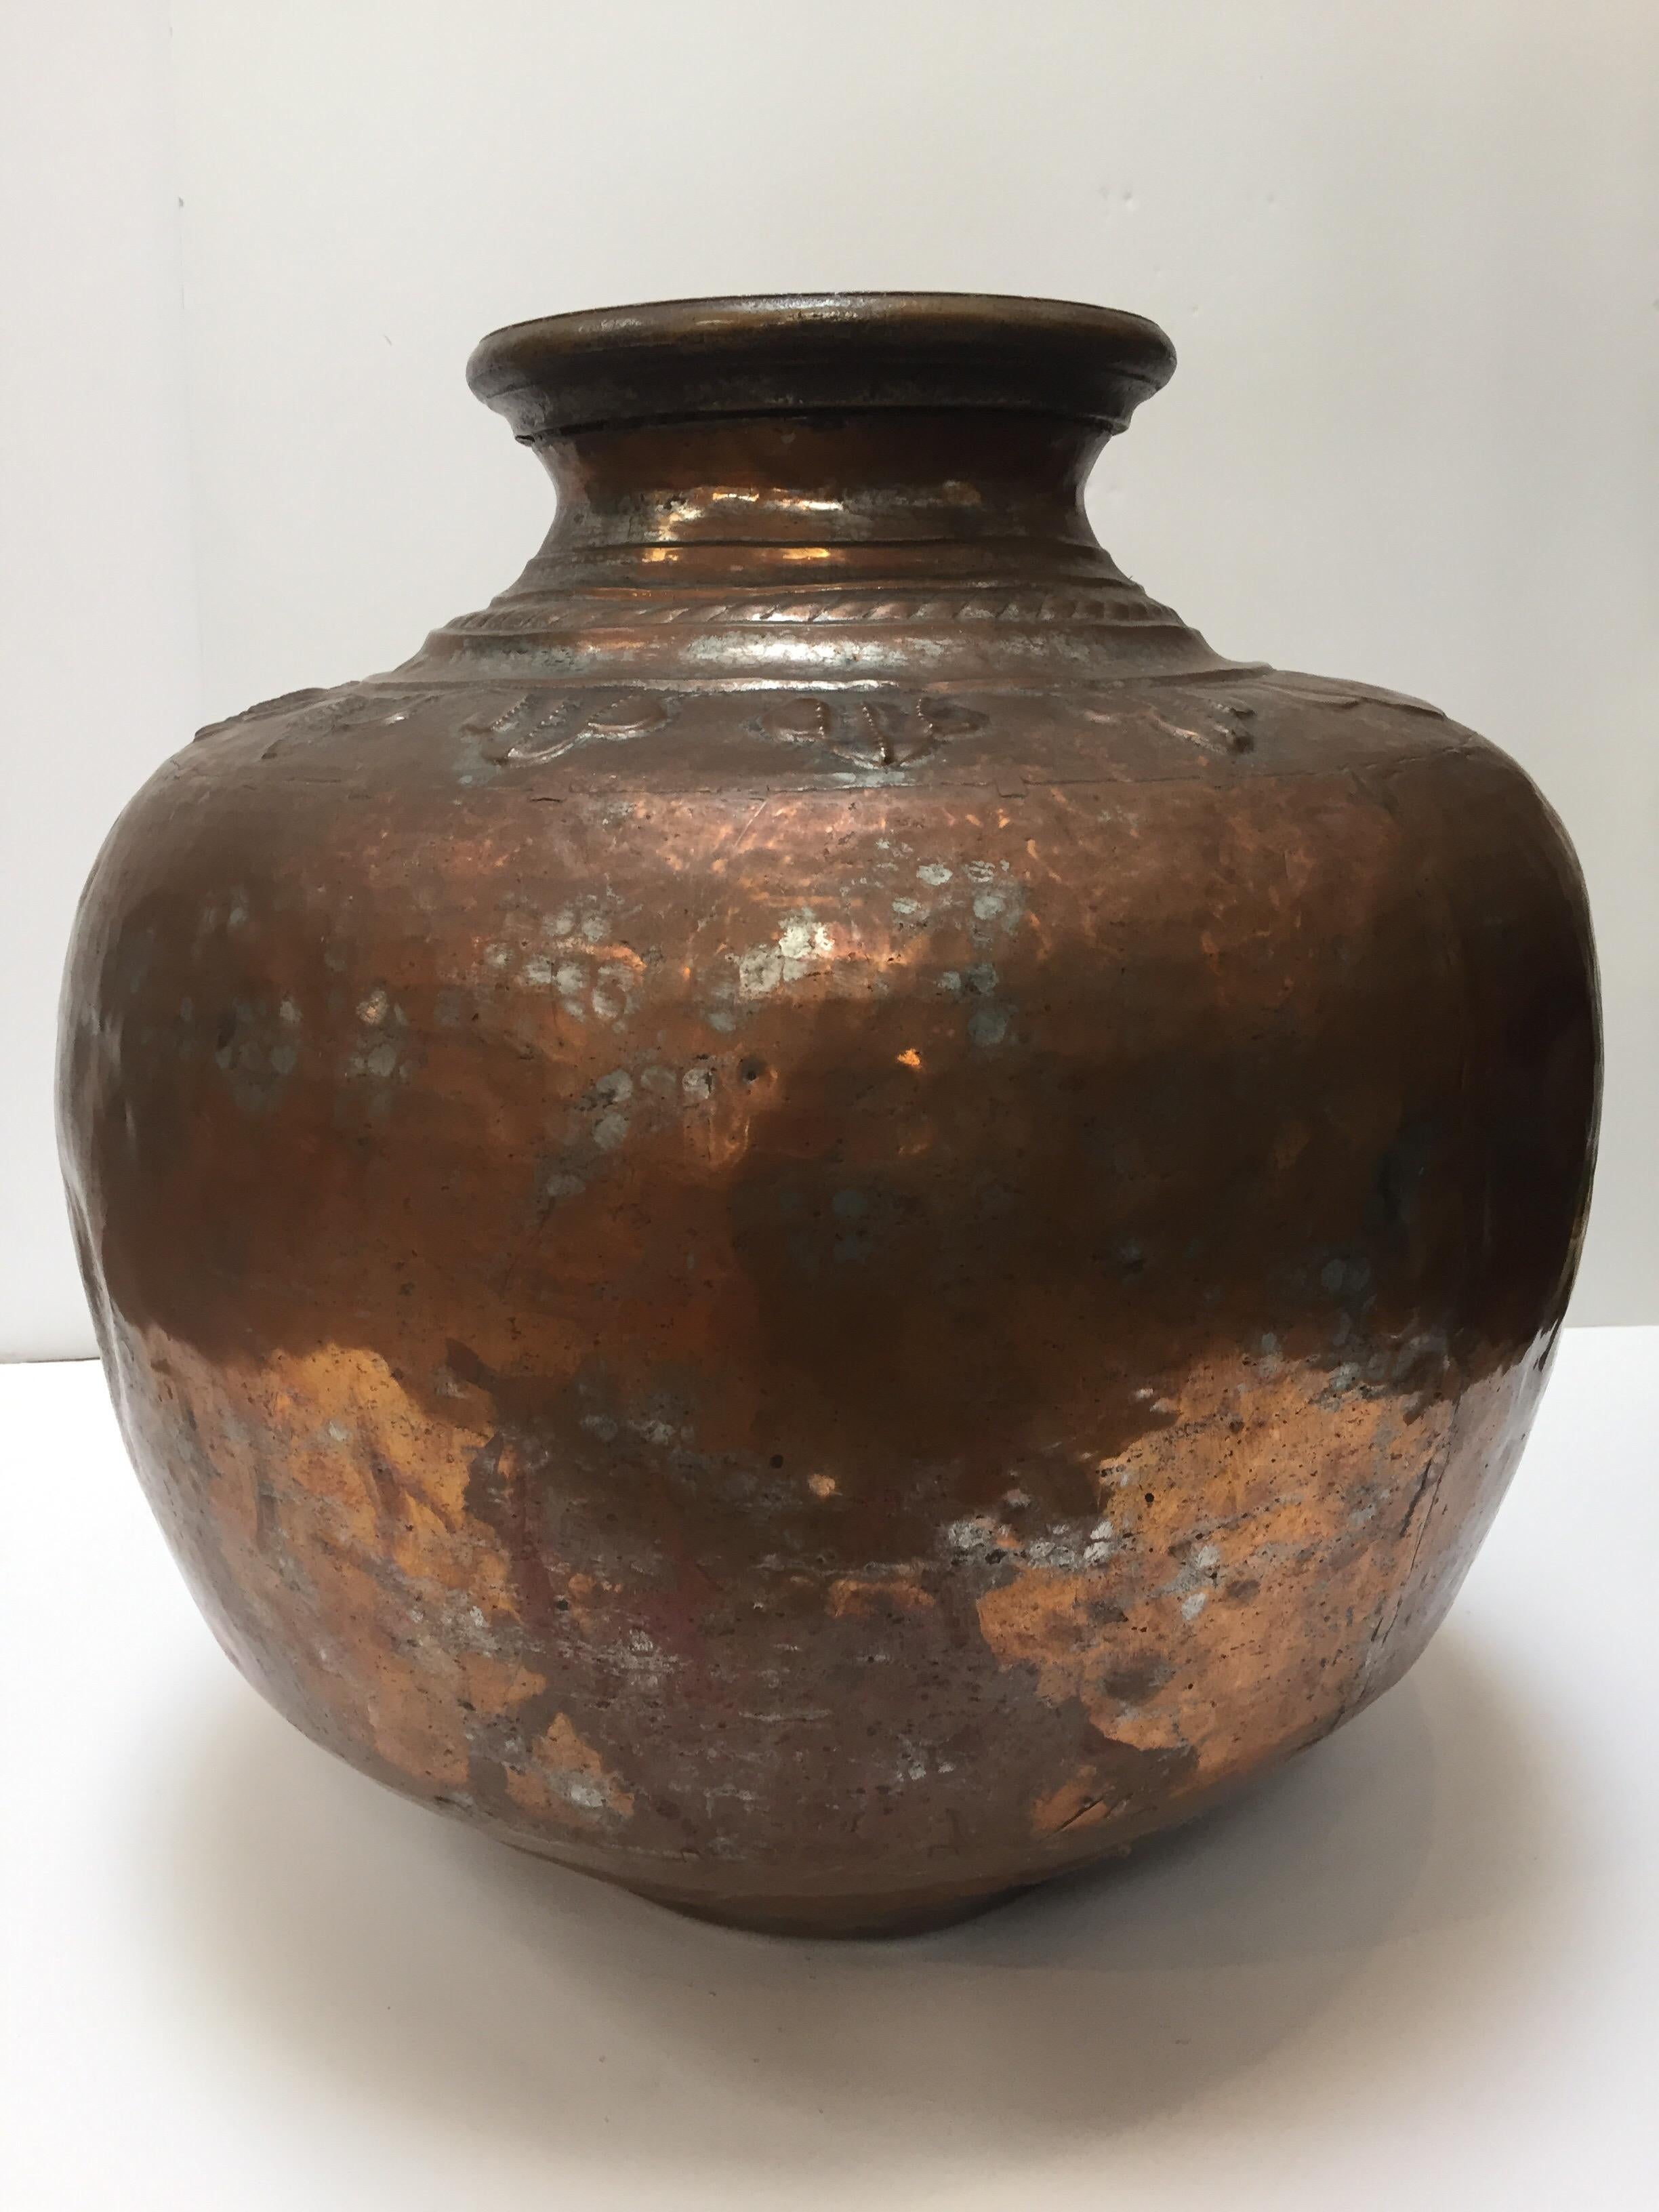 Large antique Anglo Indian Asian tinned copper vase.
Nice oversized curvaceously hand forged copper pot.
Large copper pot vase handcrafted and adorned with leaf designs and the croissant and star.
Late 19th century large decorative tinned copper